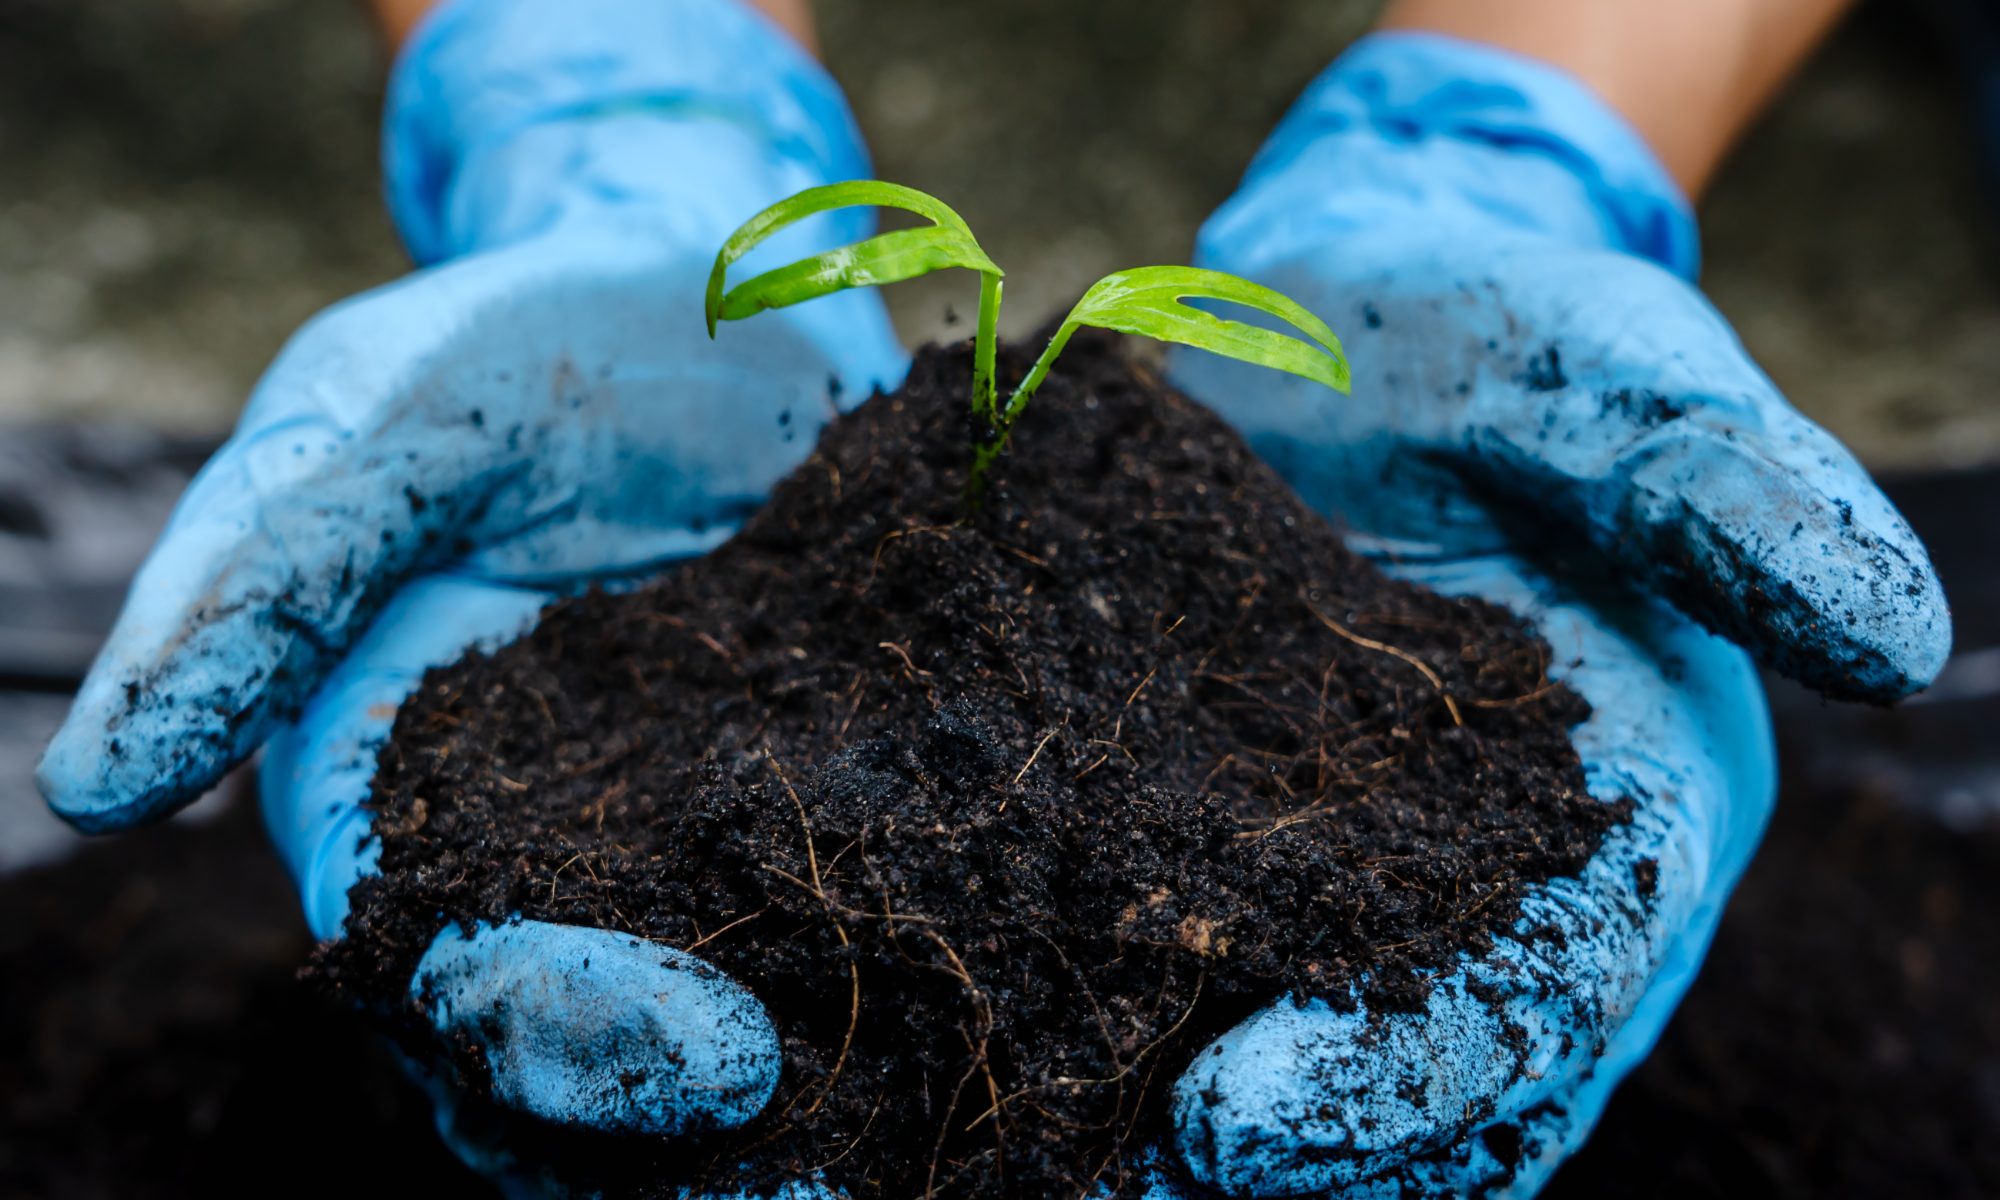 Hands wearing disposable gloves hold a pile of dirt with a tiny plant.